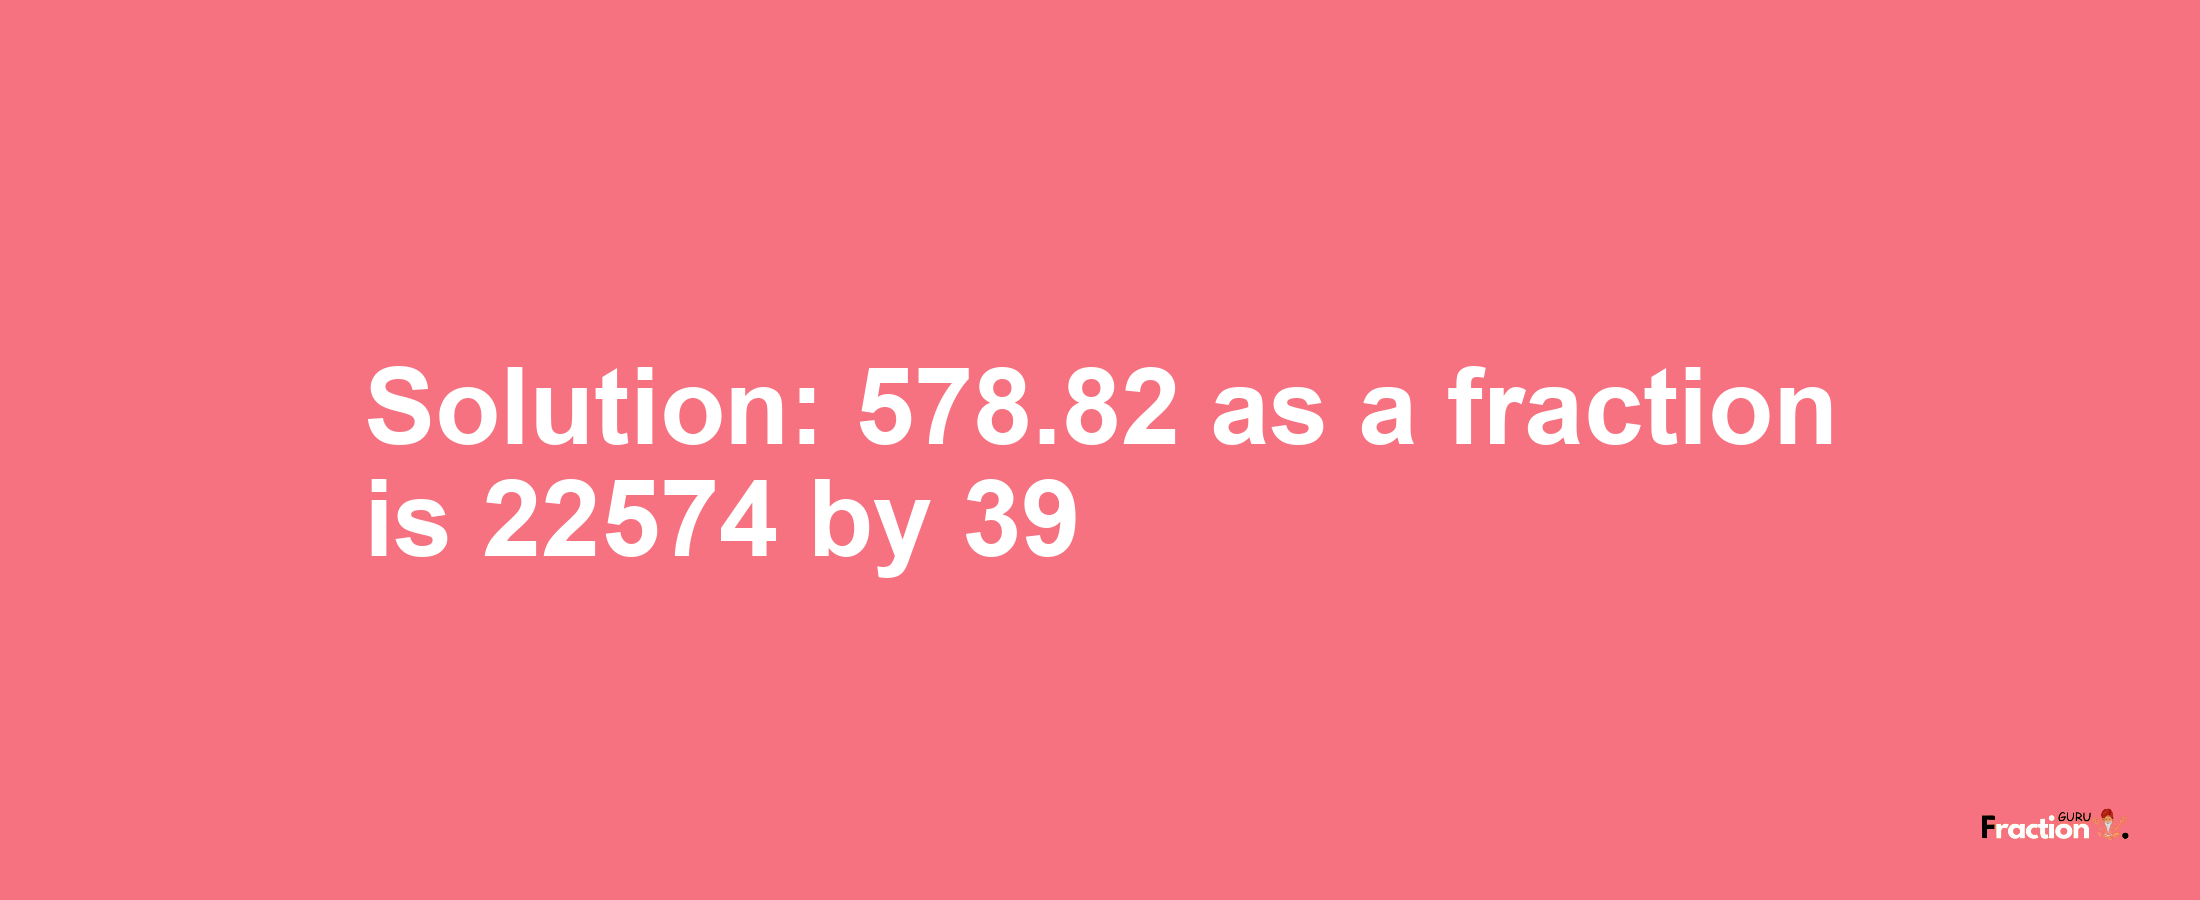 Solution:578.82 as a fraction is 22574/39